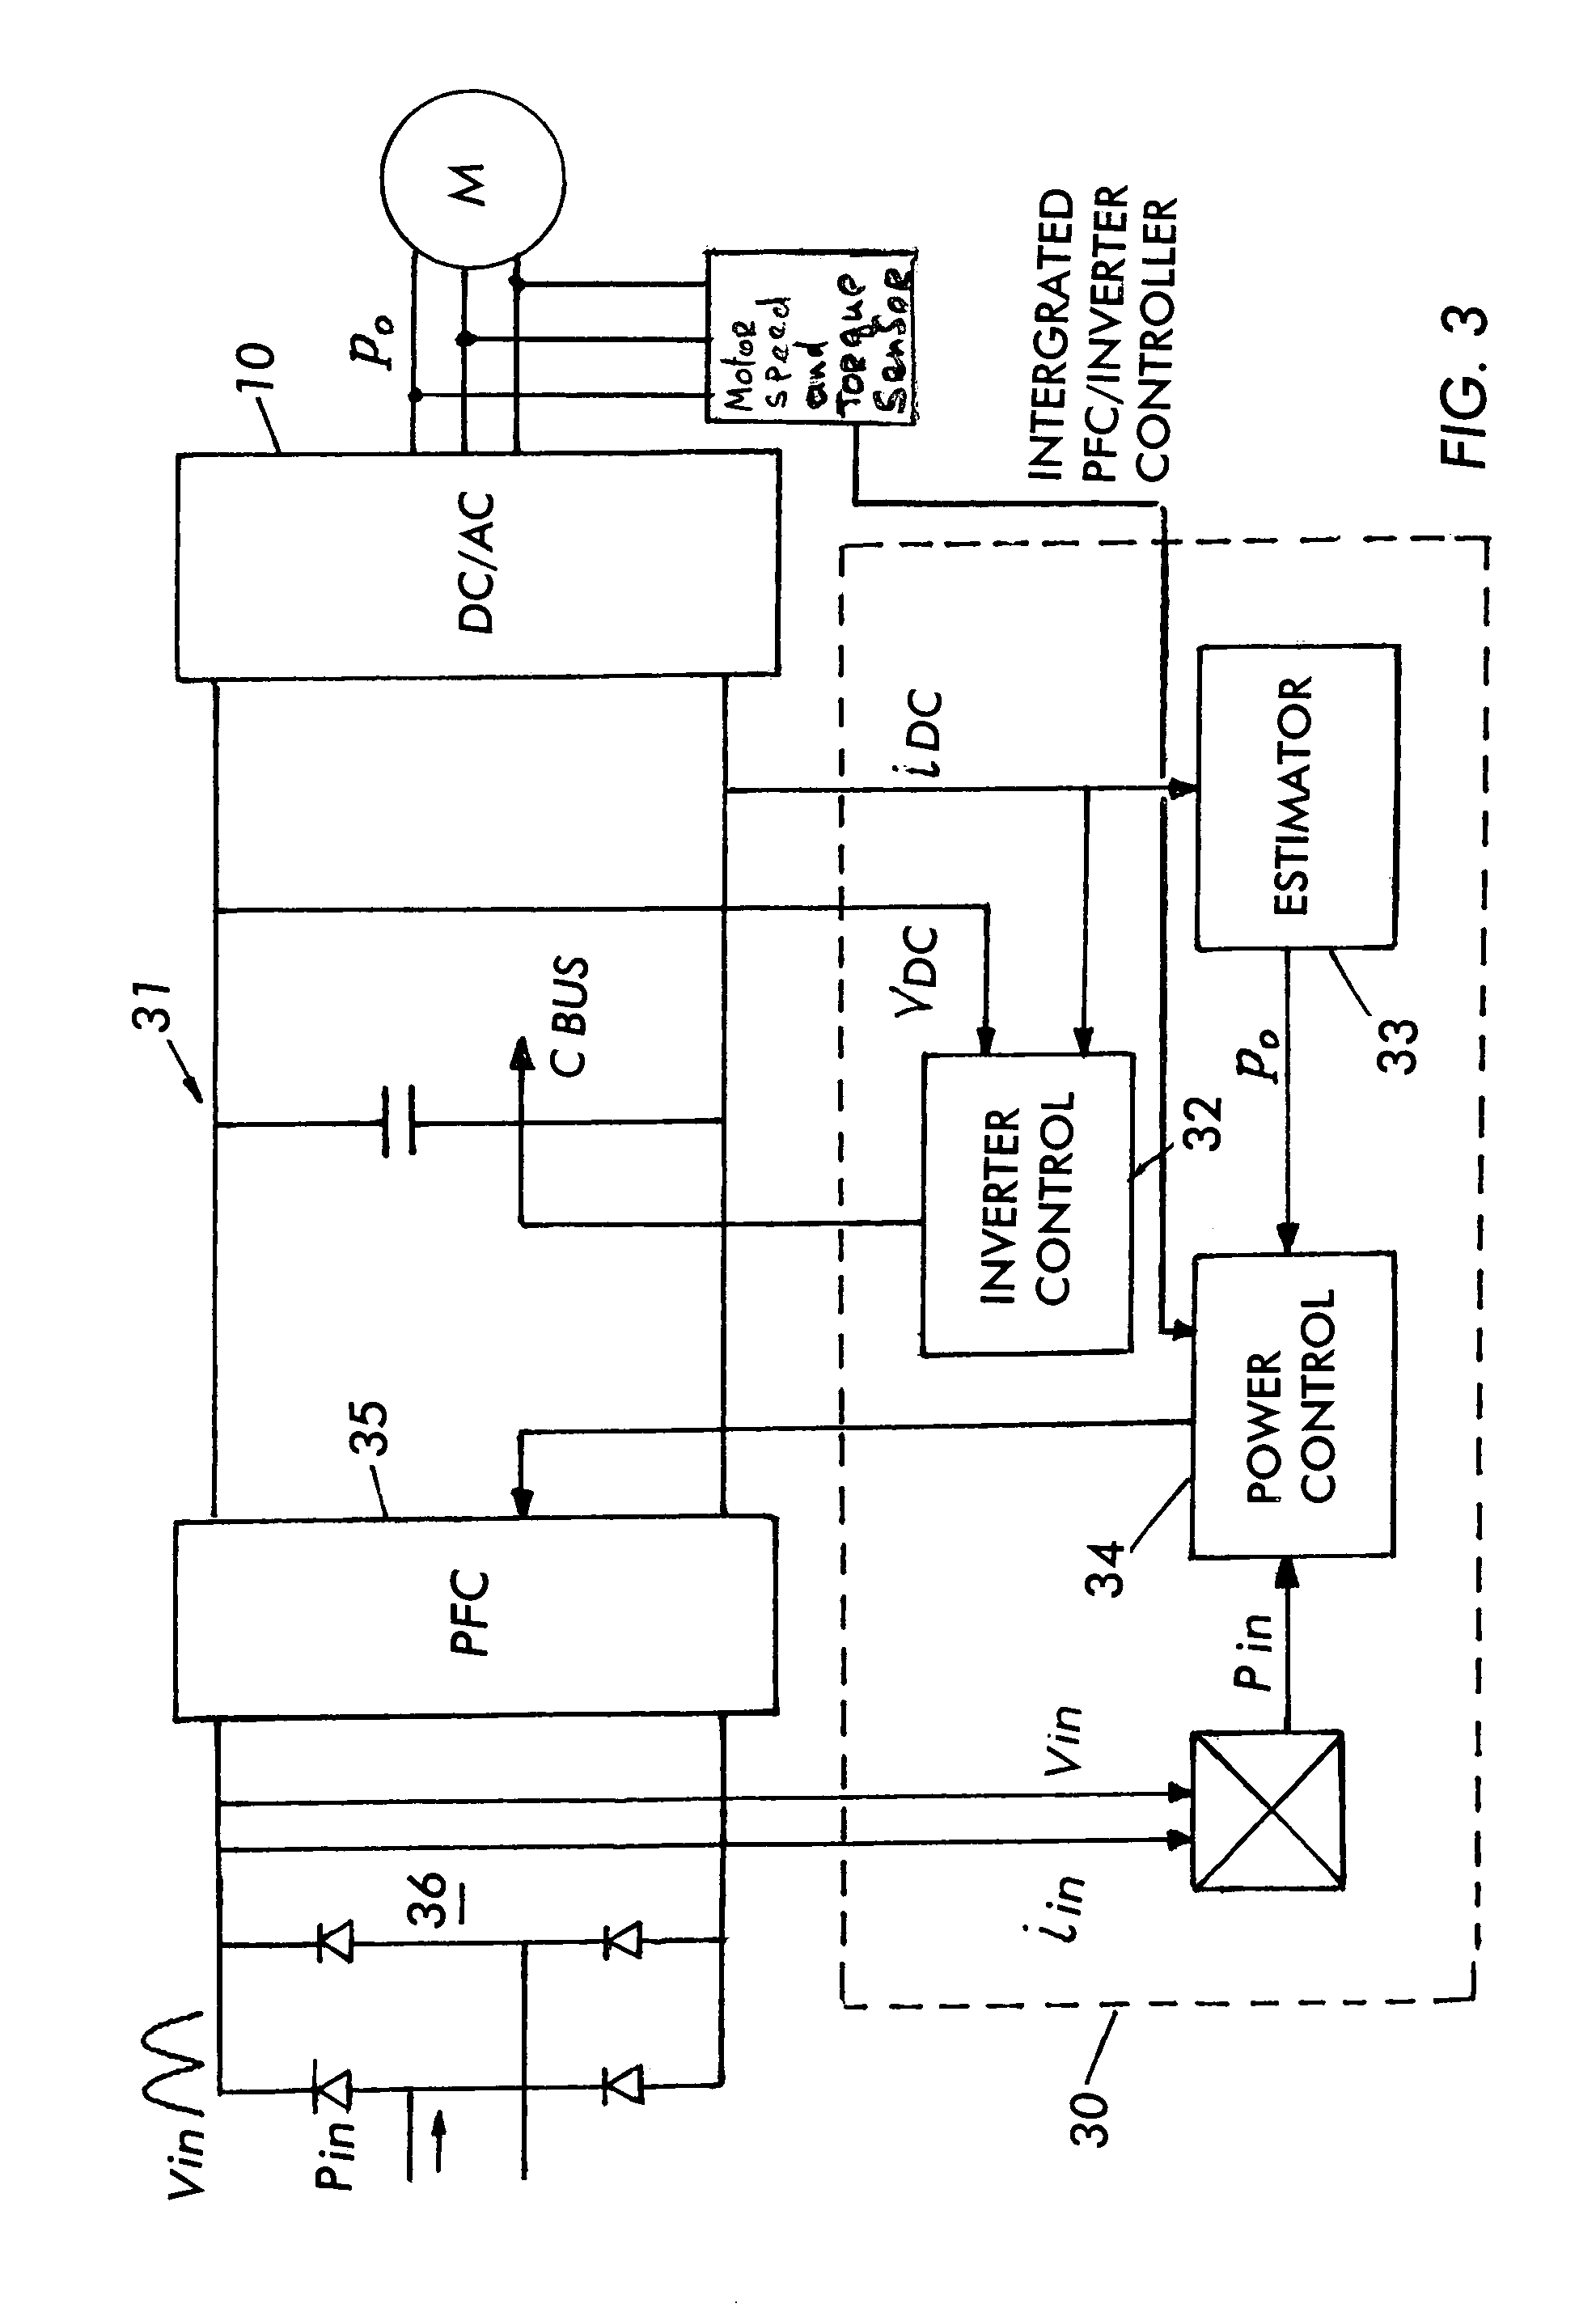 Power transfer system with reduced component ratings